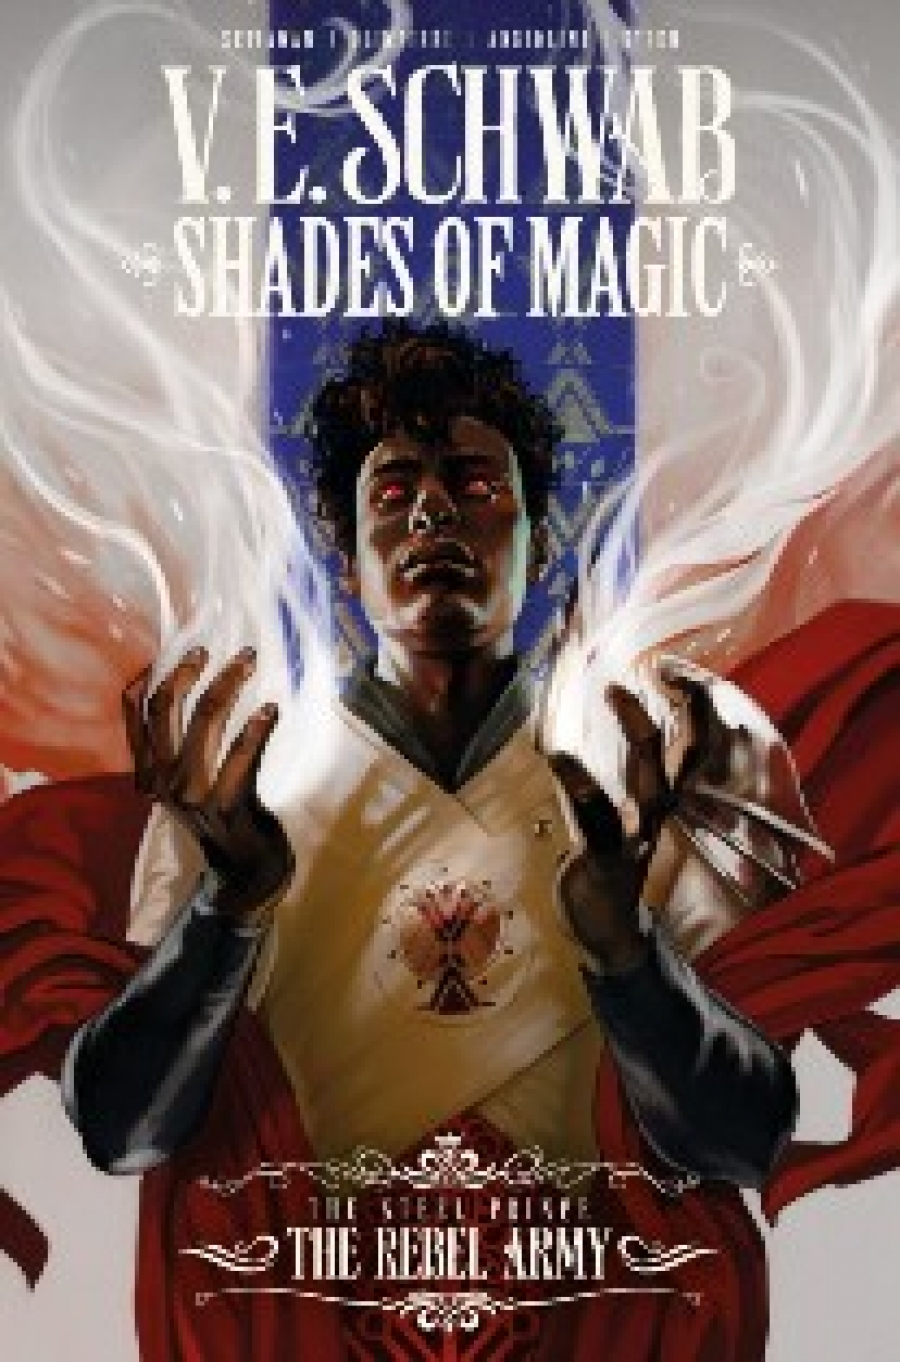 Schwab V. E. Shades of Magic: The Steel Prince the Rebel Army 